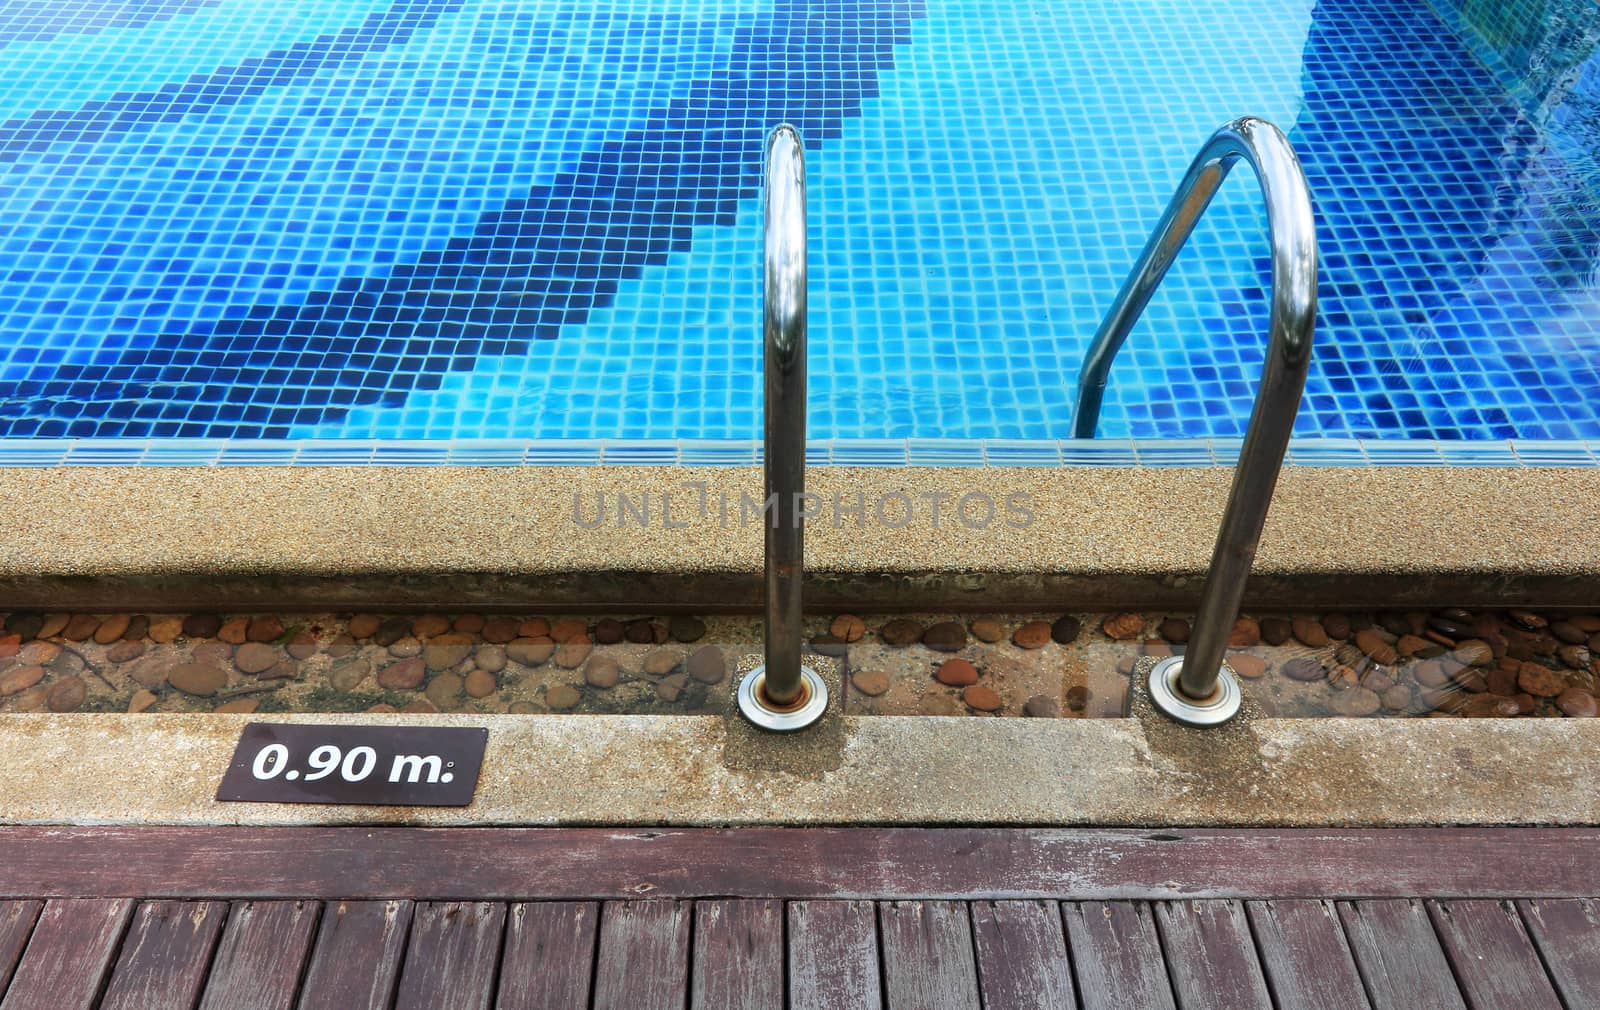 Swimming pool depth marker by olovedog